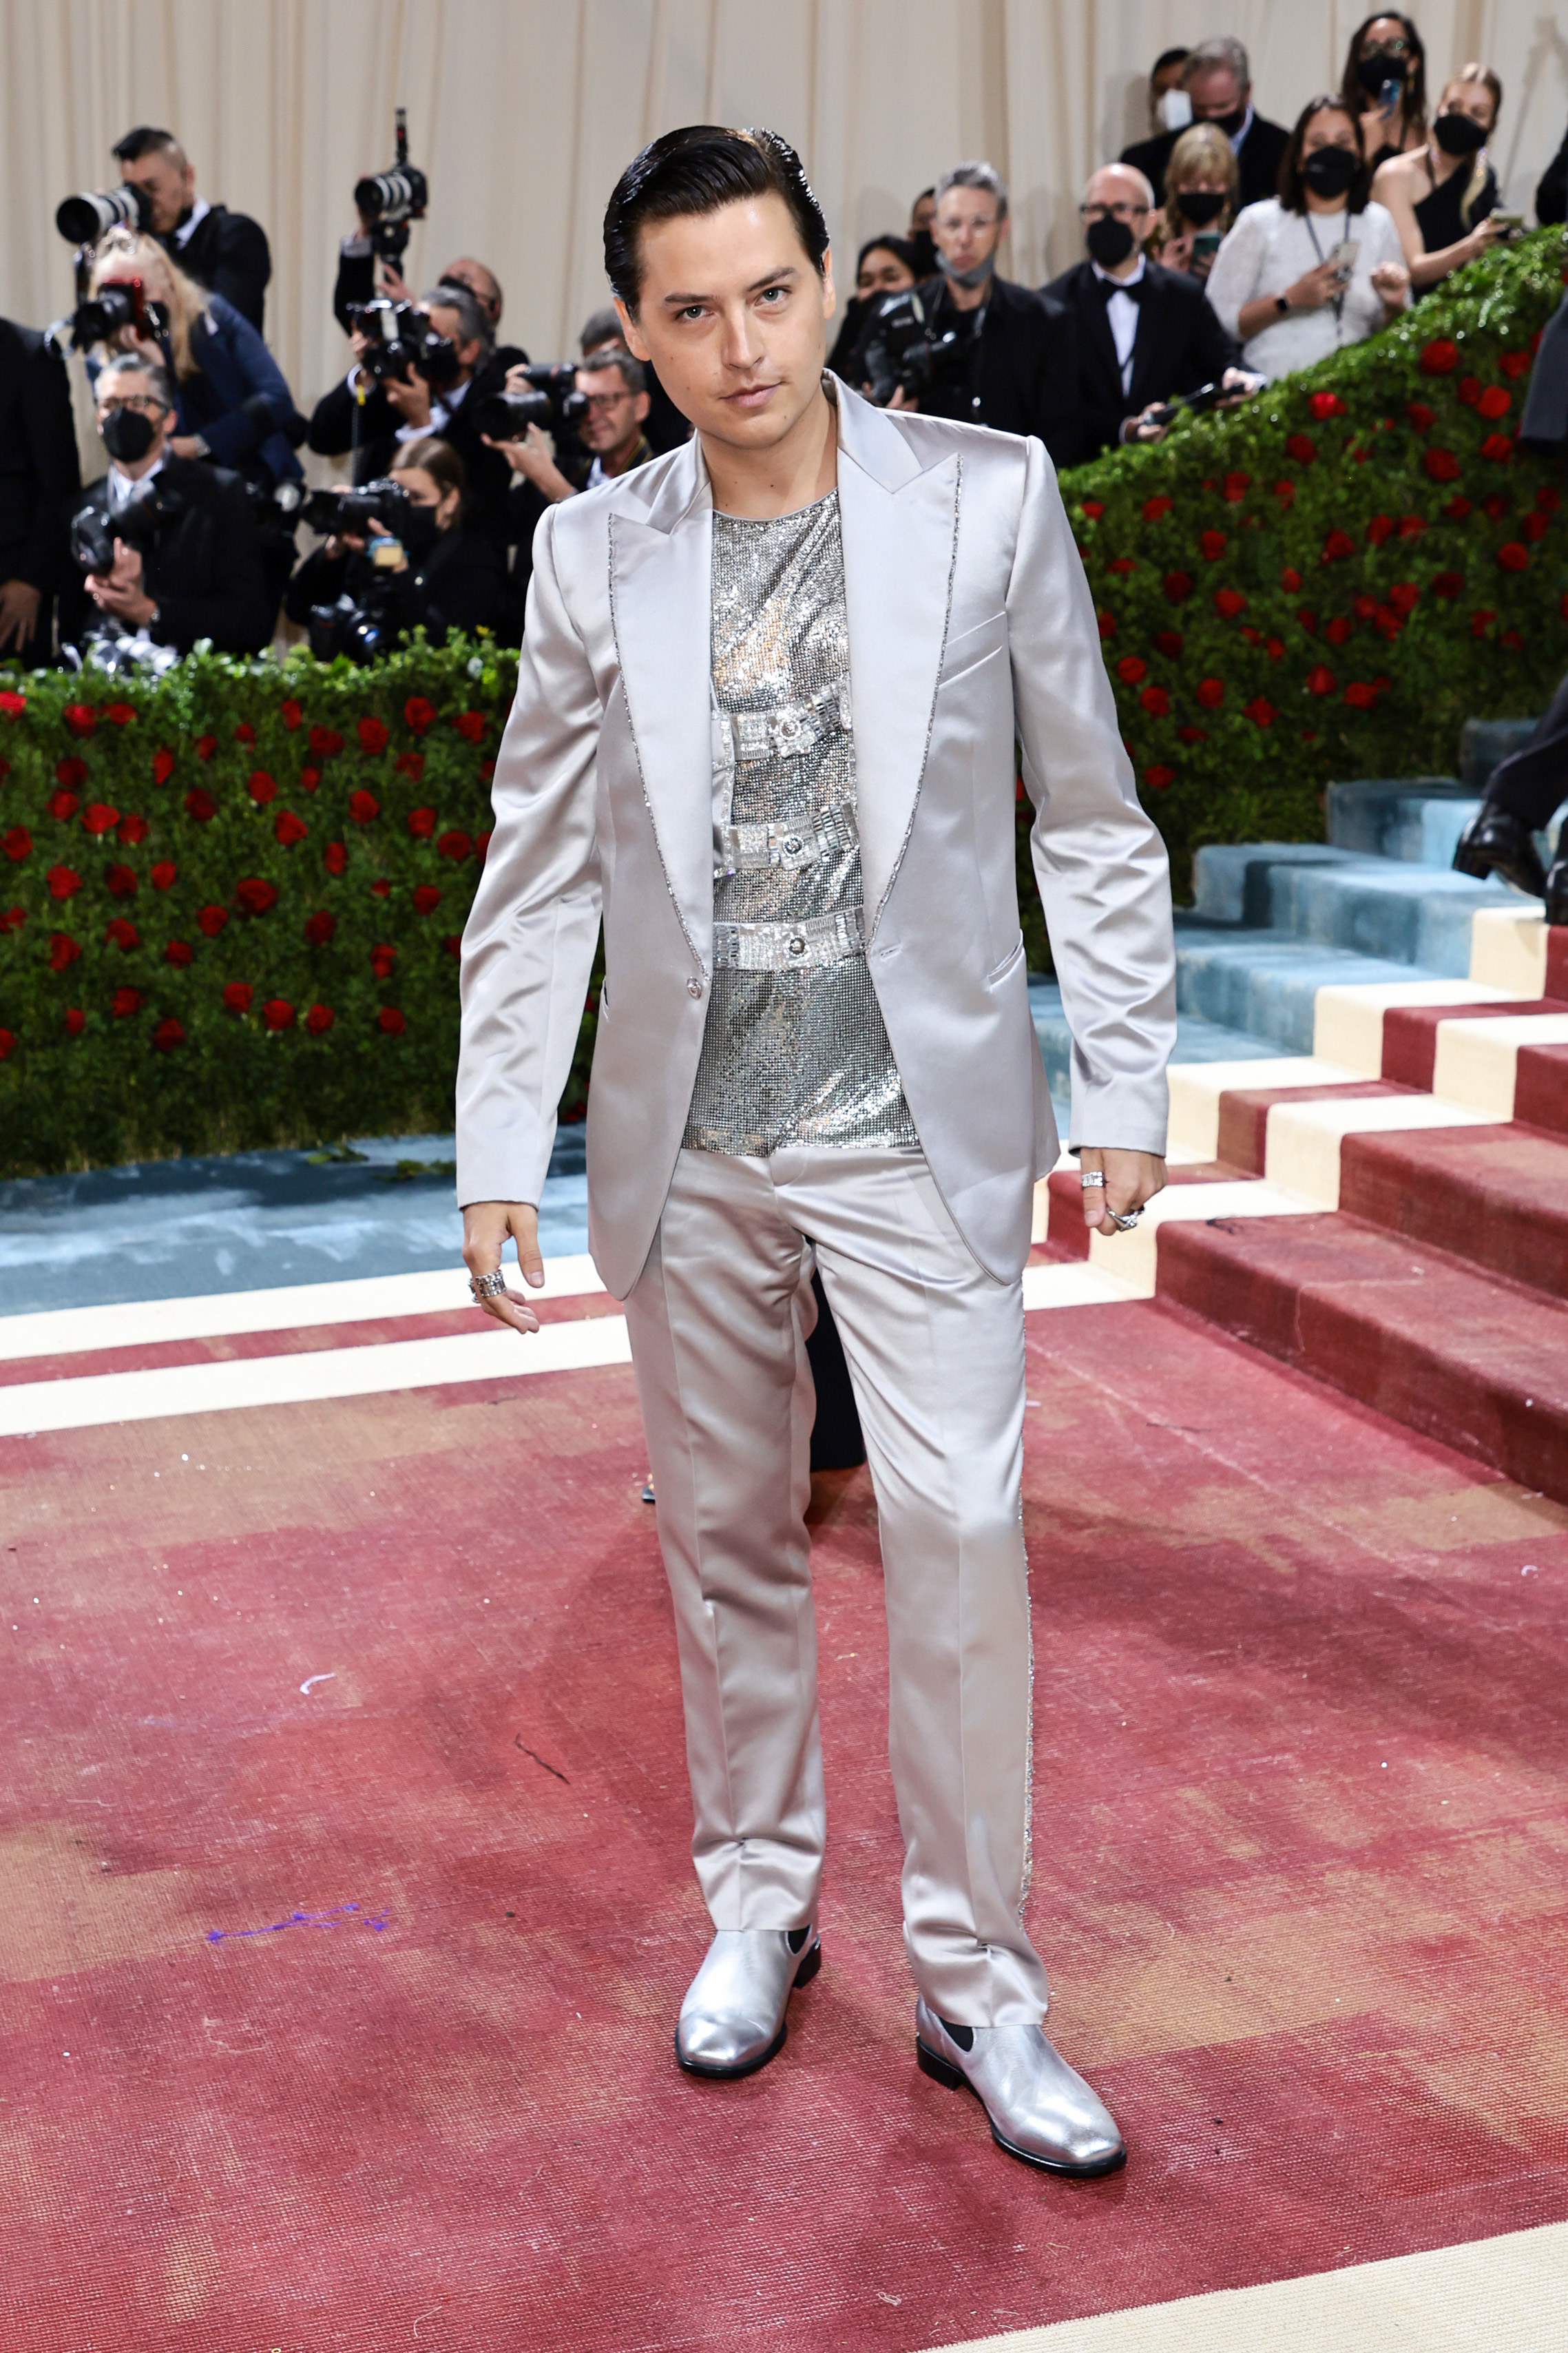 Cole Sprouse at the Met Gala